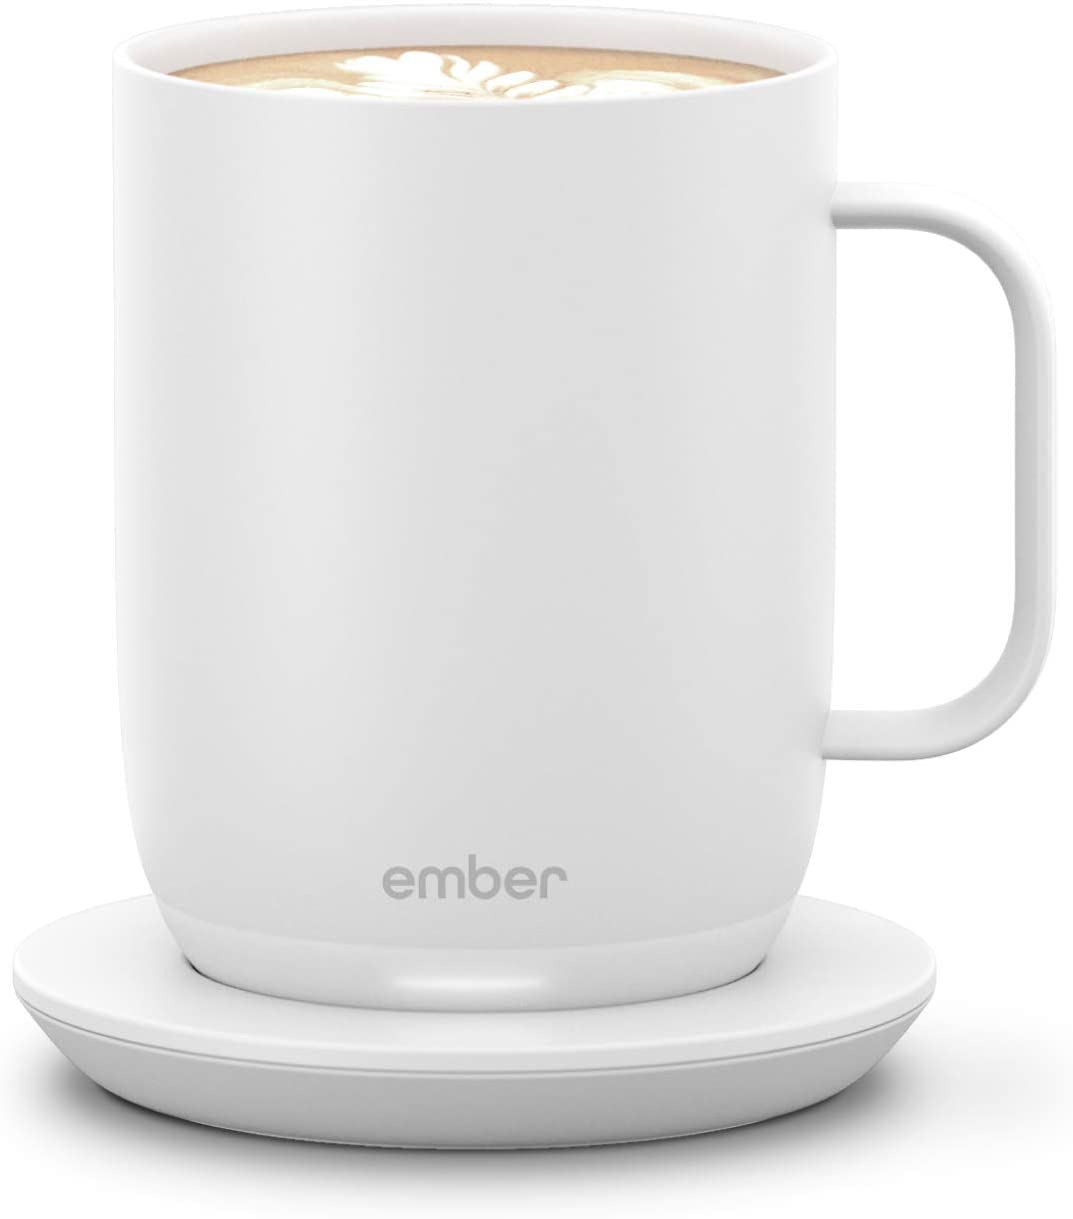 Ember Temperature Control Smart Mug 2, 14 oz, Grey, 80 min Battery Life |  App Controlled Heated Coffee Mug | Improved Design with Clear Splash-Proof